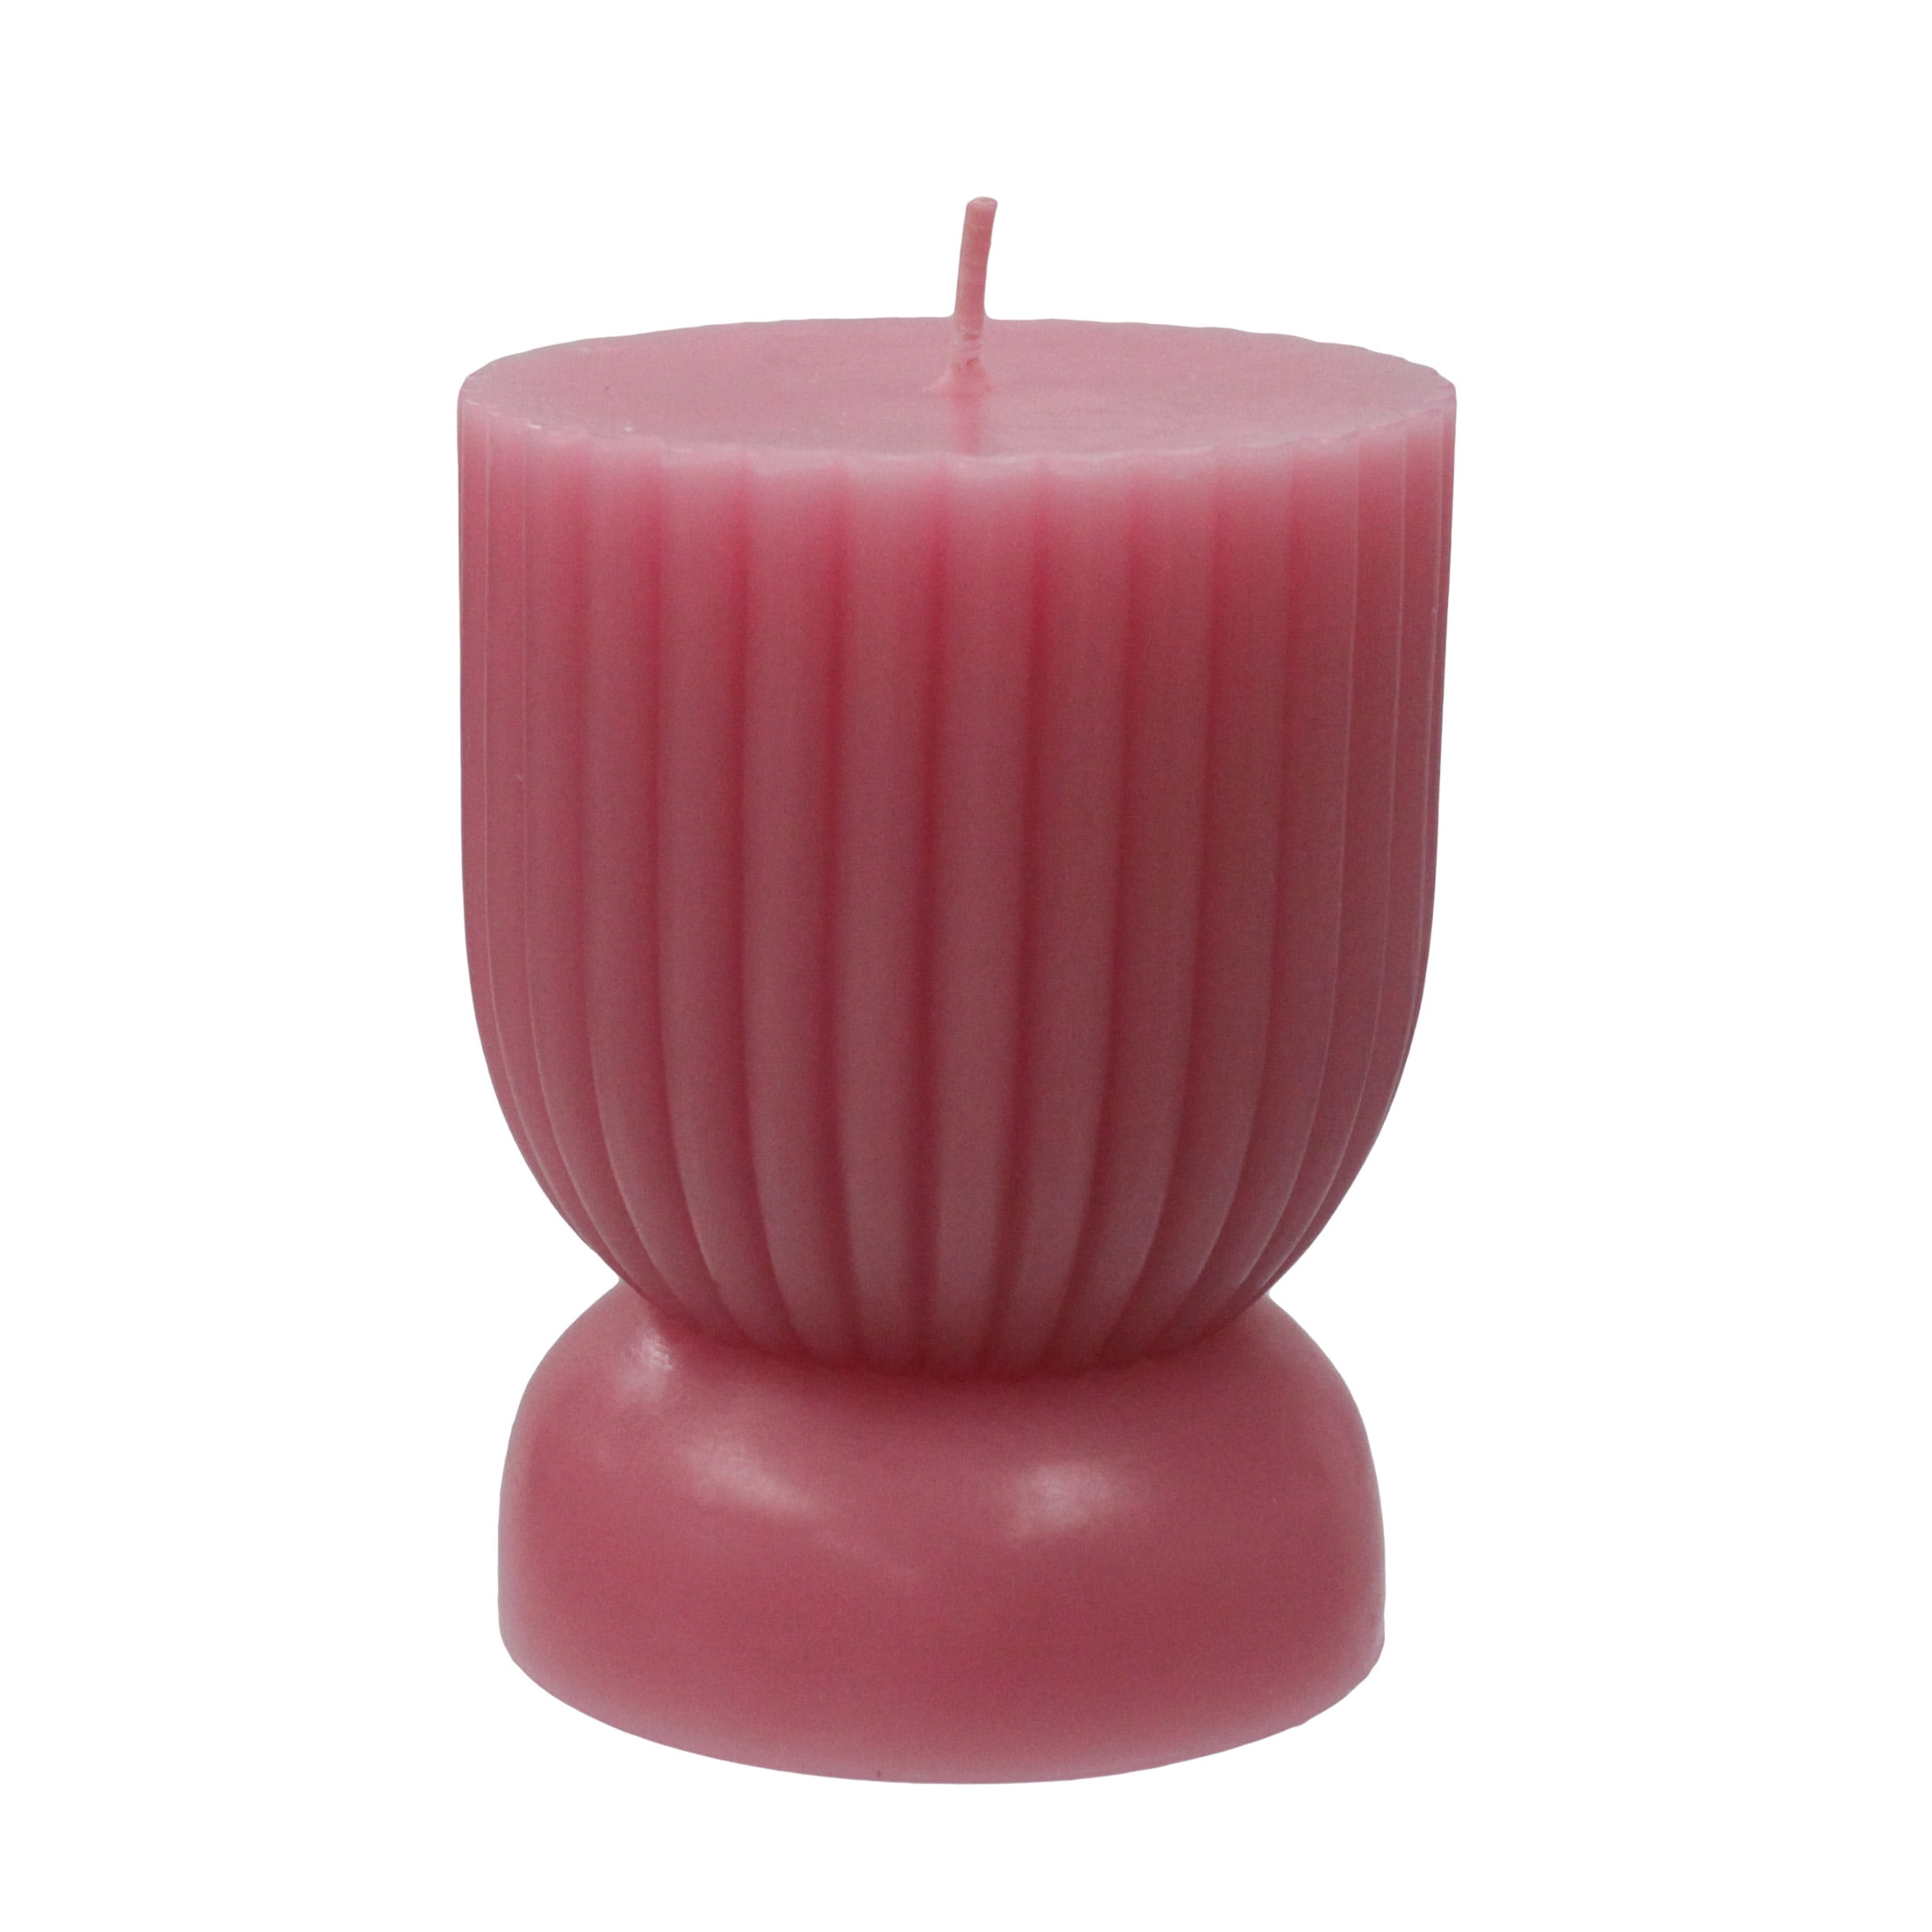 Better Homes & Gardens Unscented Ribbed Pillar Candle, 3x4 inches